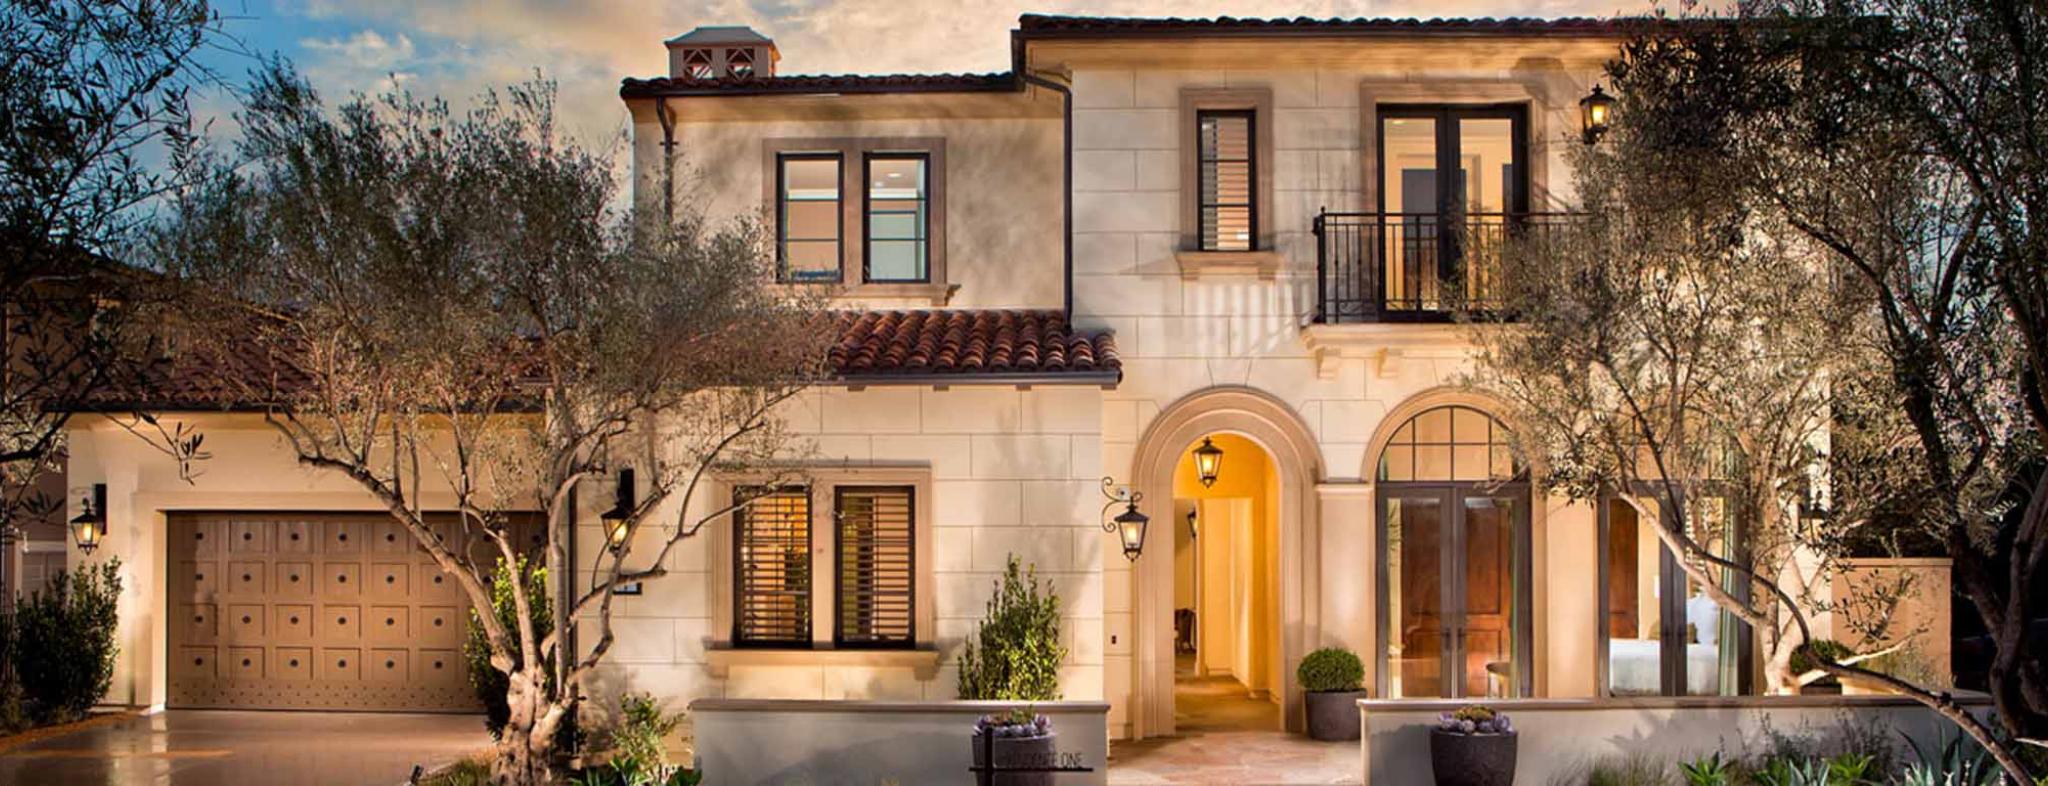 The New Home Company Earns Multiple Honors at California’s Homebuilding Awards Shows